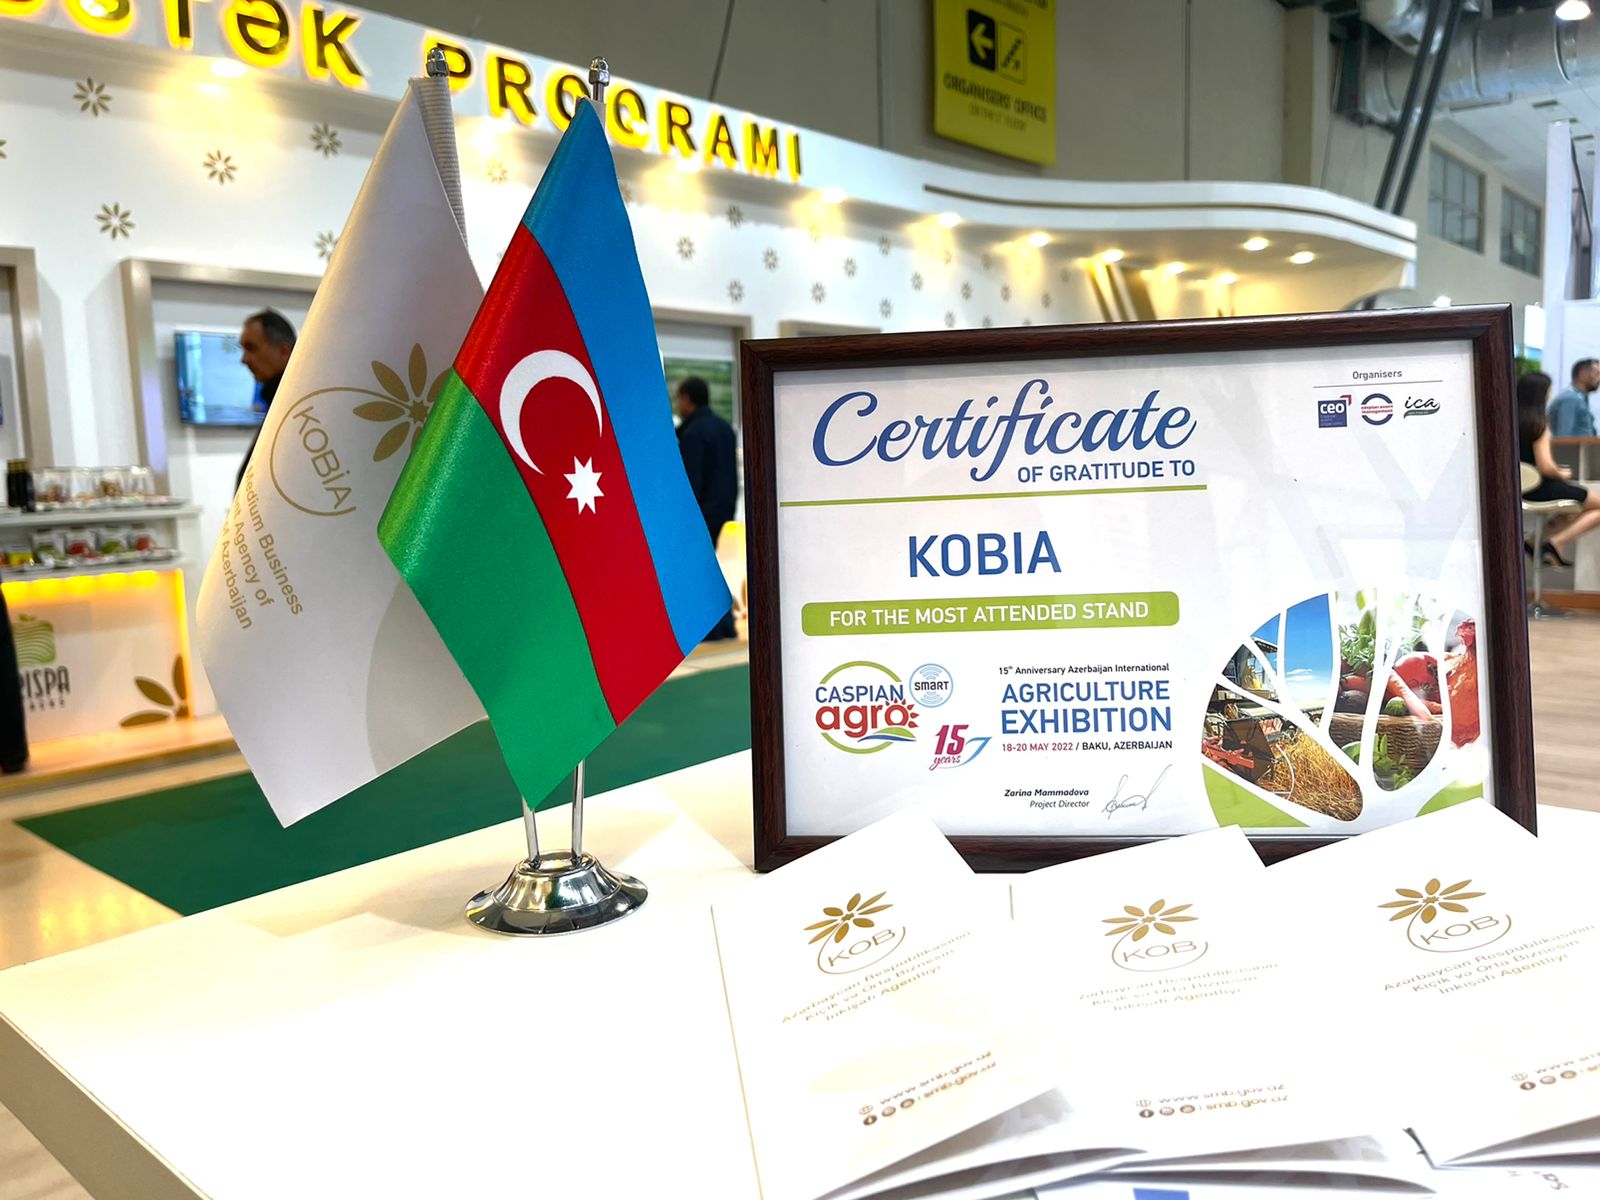 KOBİA's stand was the most visited 